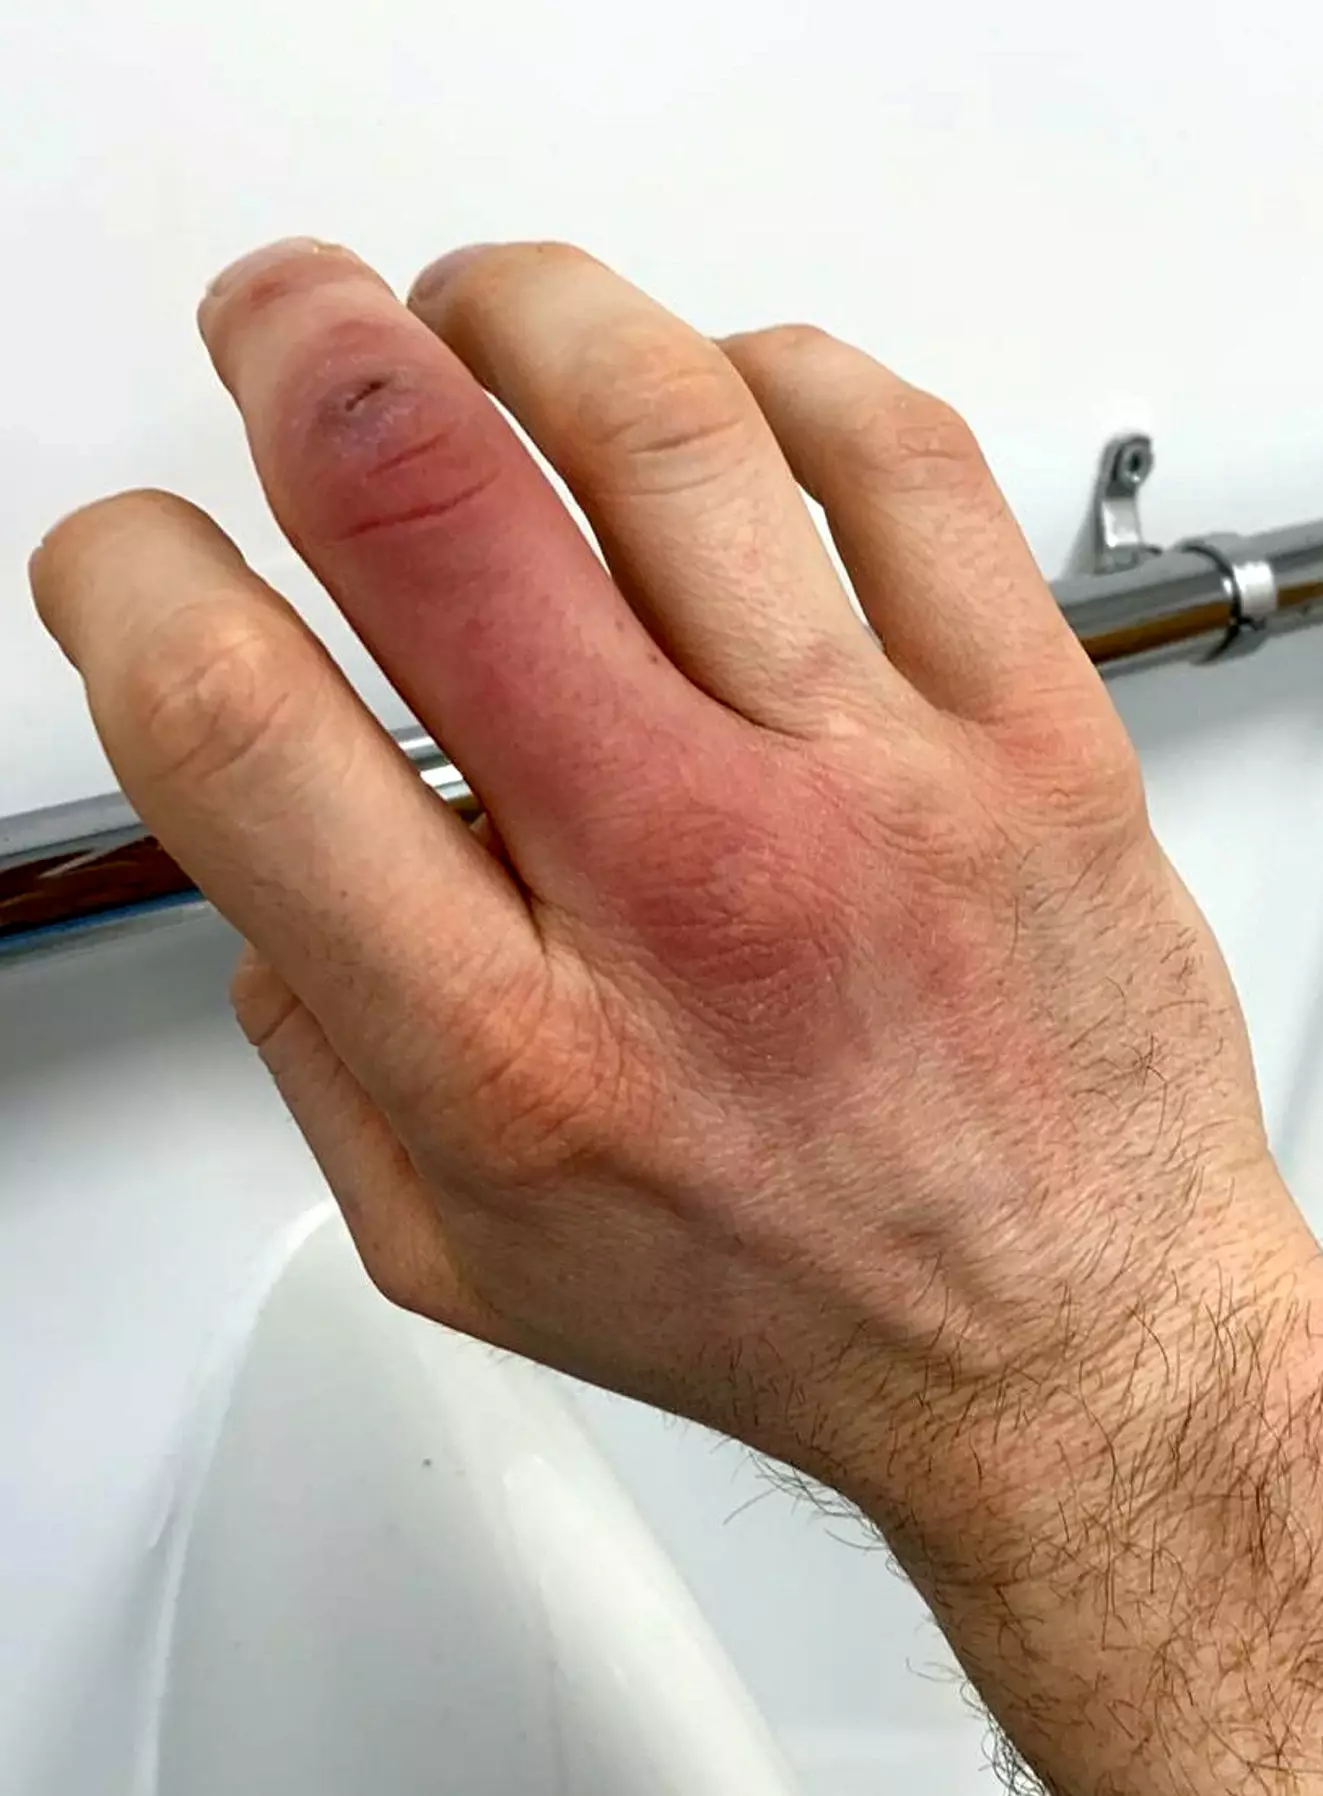 Steve's finger and hand went red and swollen.